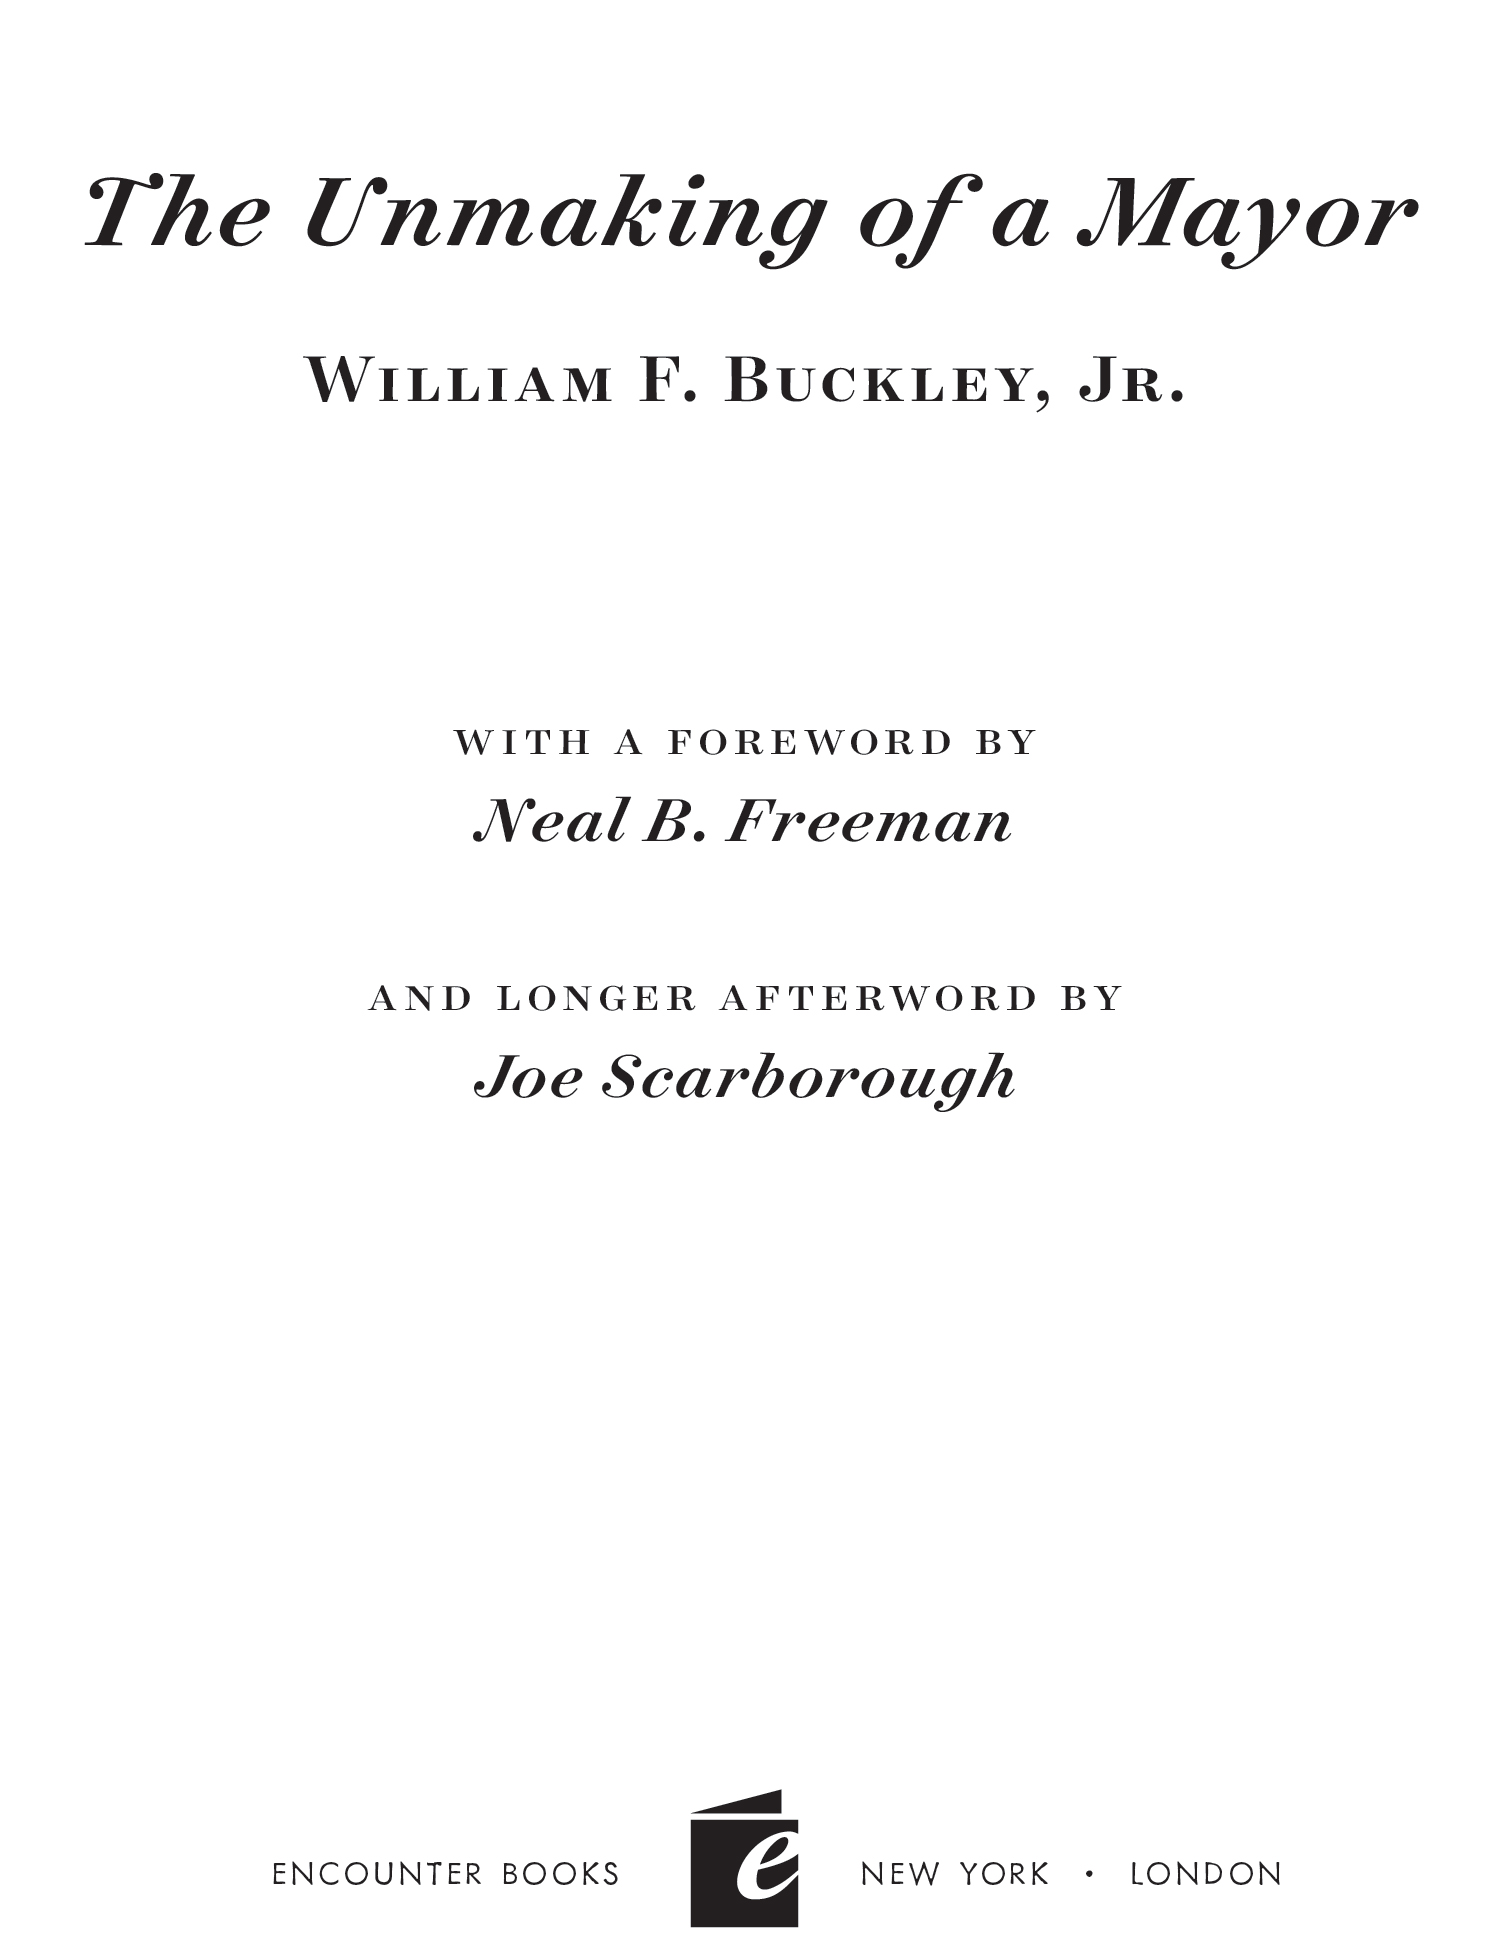 1966 by William F Buckley Jr First edition published in 1966 by Viking Press - photo 11